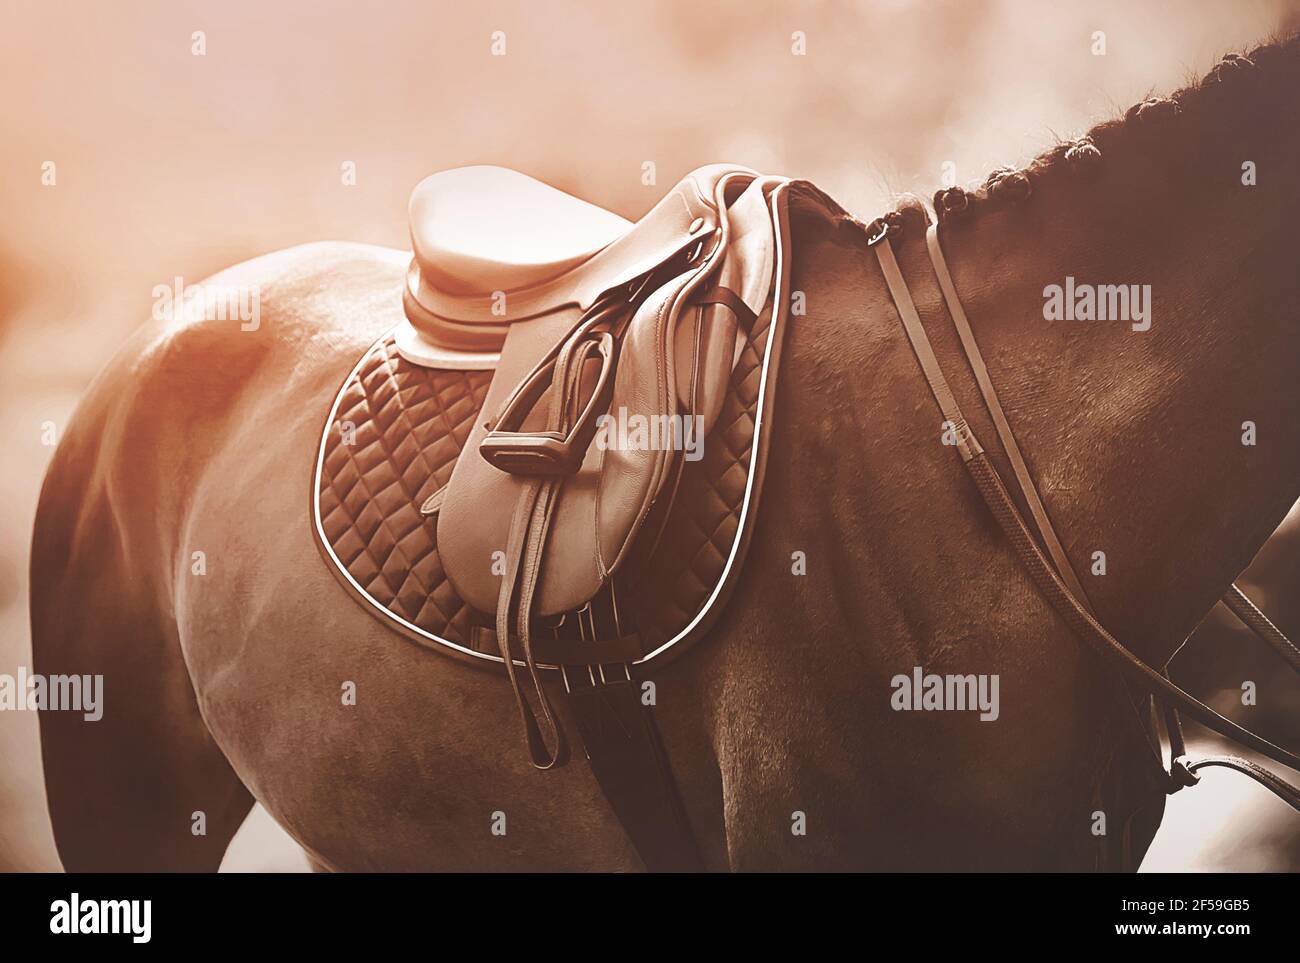 A bay horse with a braided mane is wearing a bridle and a leather saddle with a dark saddlecloth, which are illuminated by sunlight. Equestrian sports Stock Photo